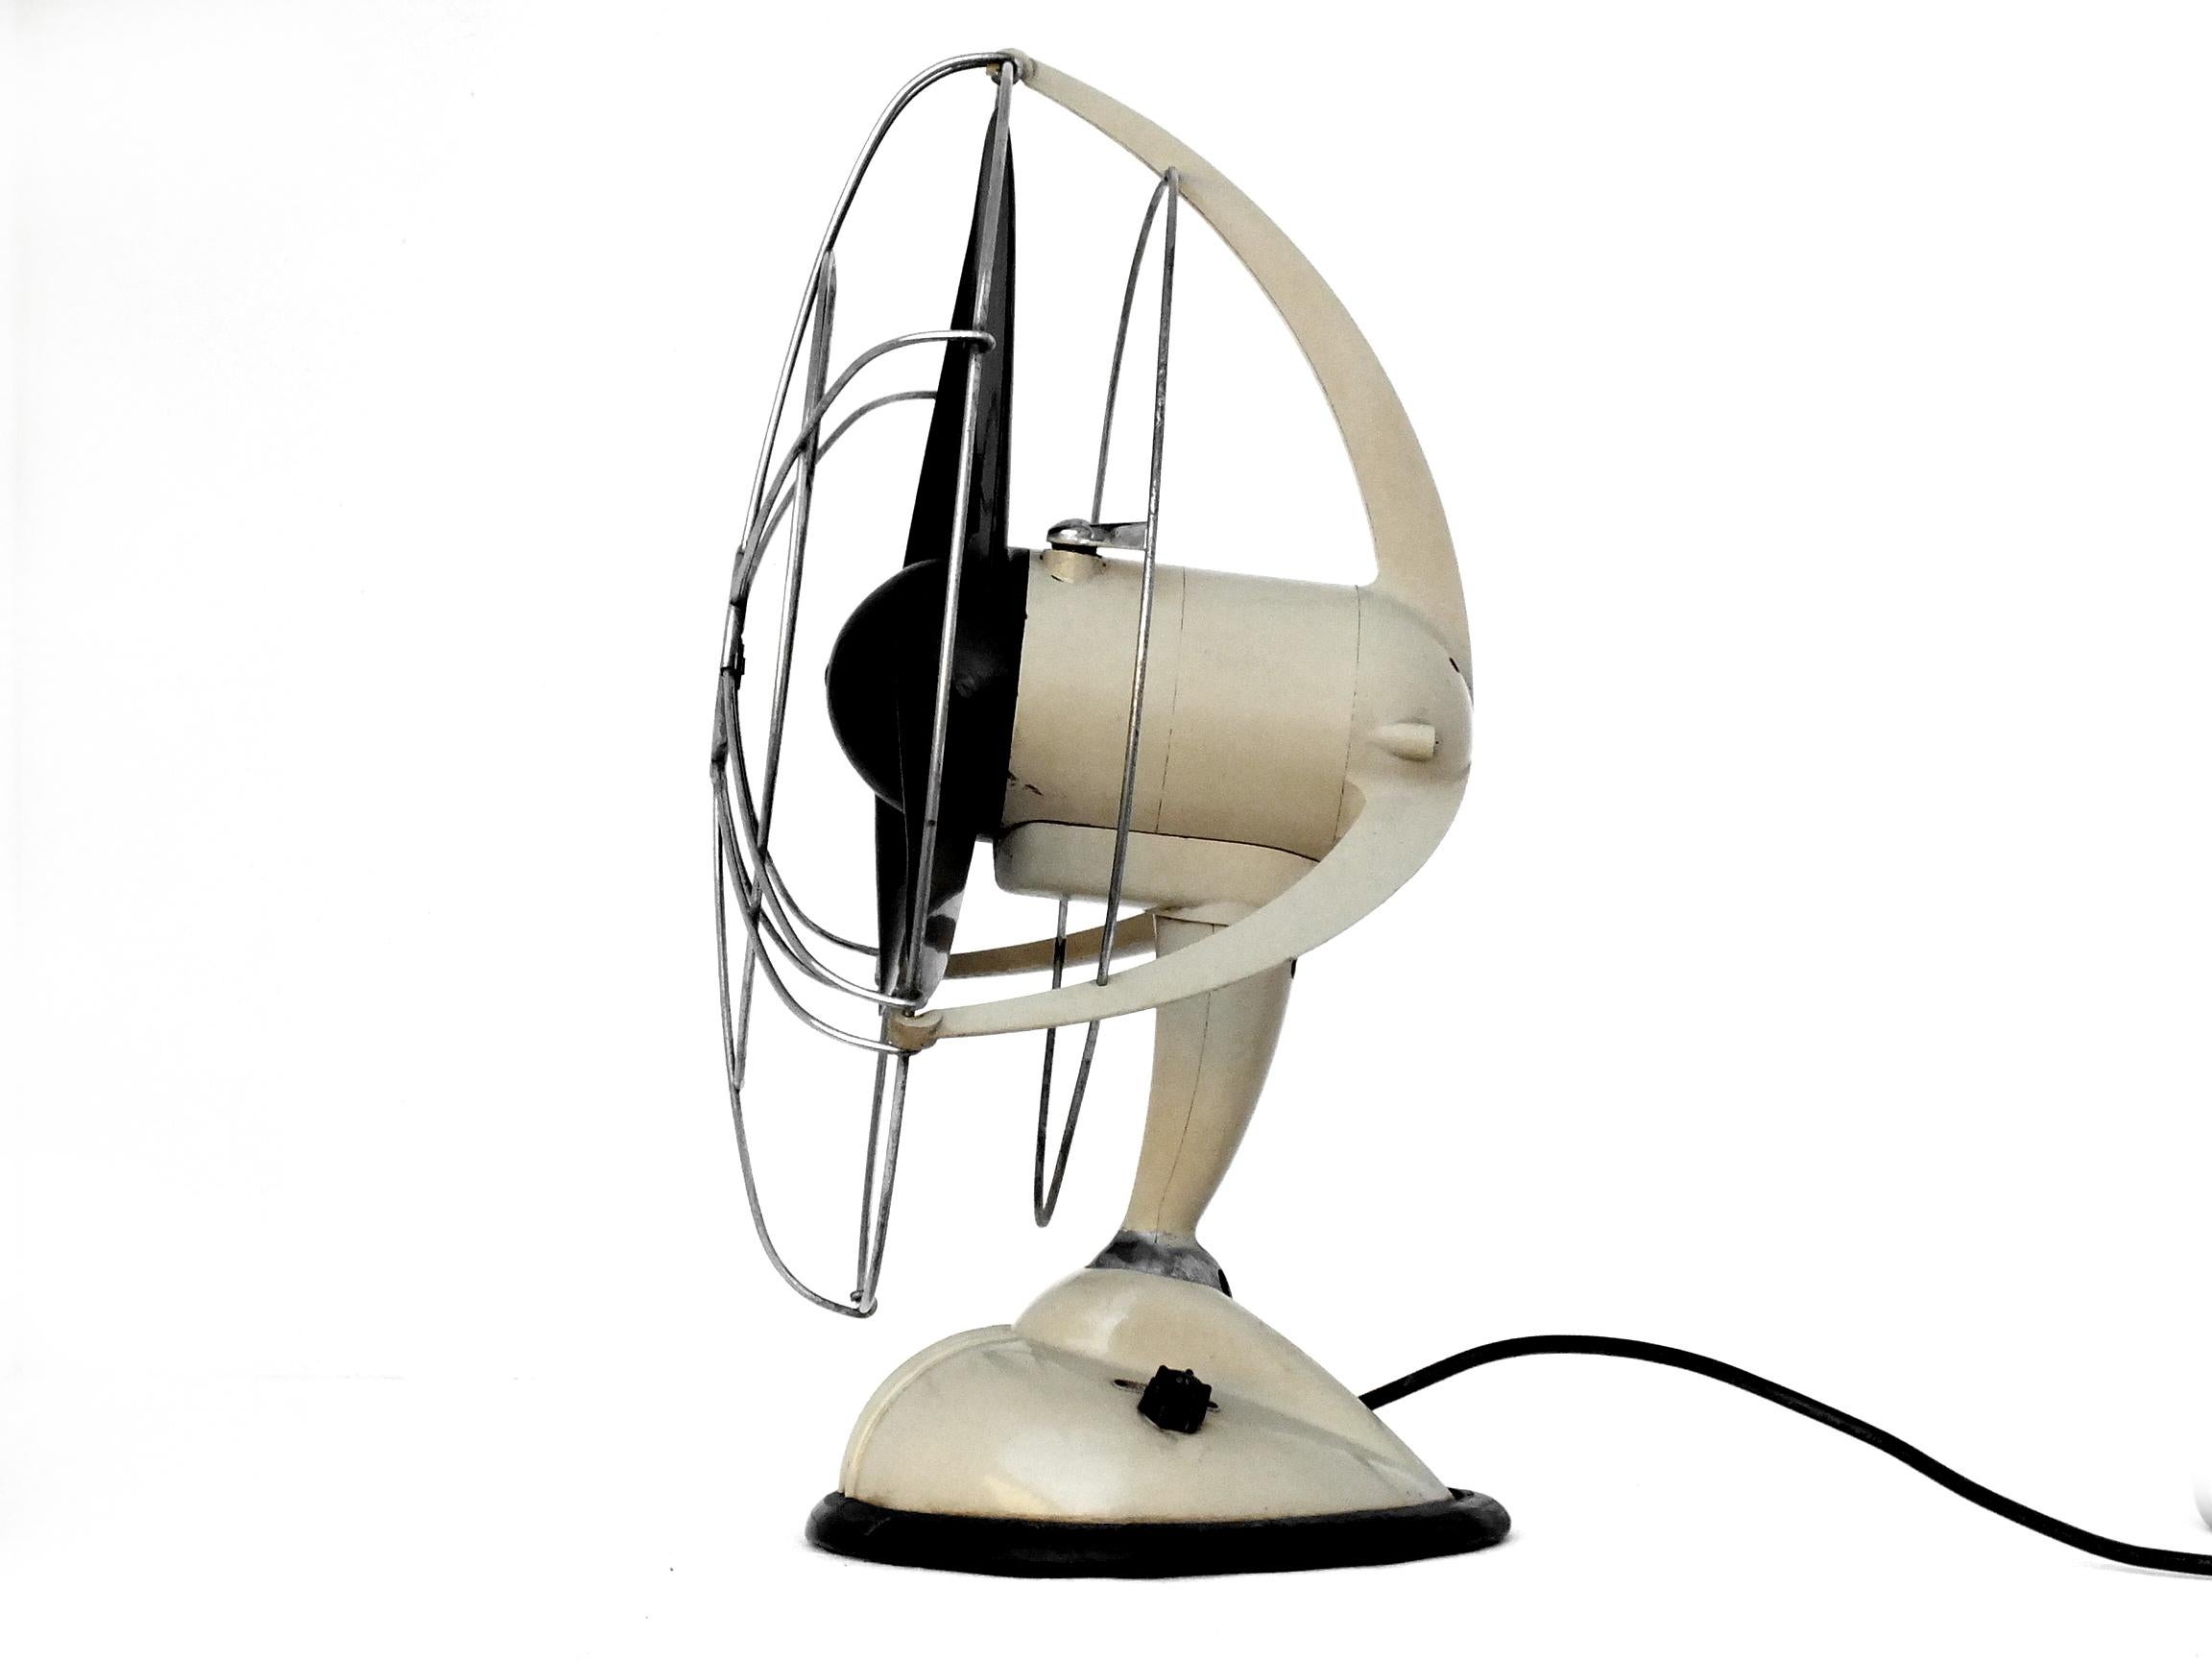 Super Ercole by Ercole Marelli Italy design years '50 electric fan 0-404 big size

 Measure; high 21,4 inches and is in good vintage condition working to 150-160 volt

 colour is cream and chrome, the three paddle blade arms is dark brown.